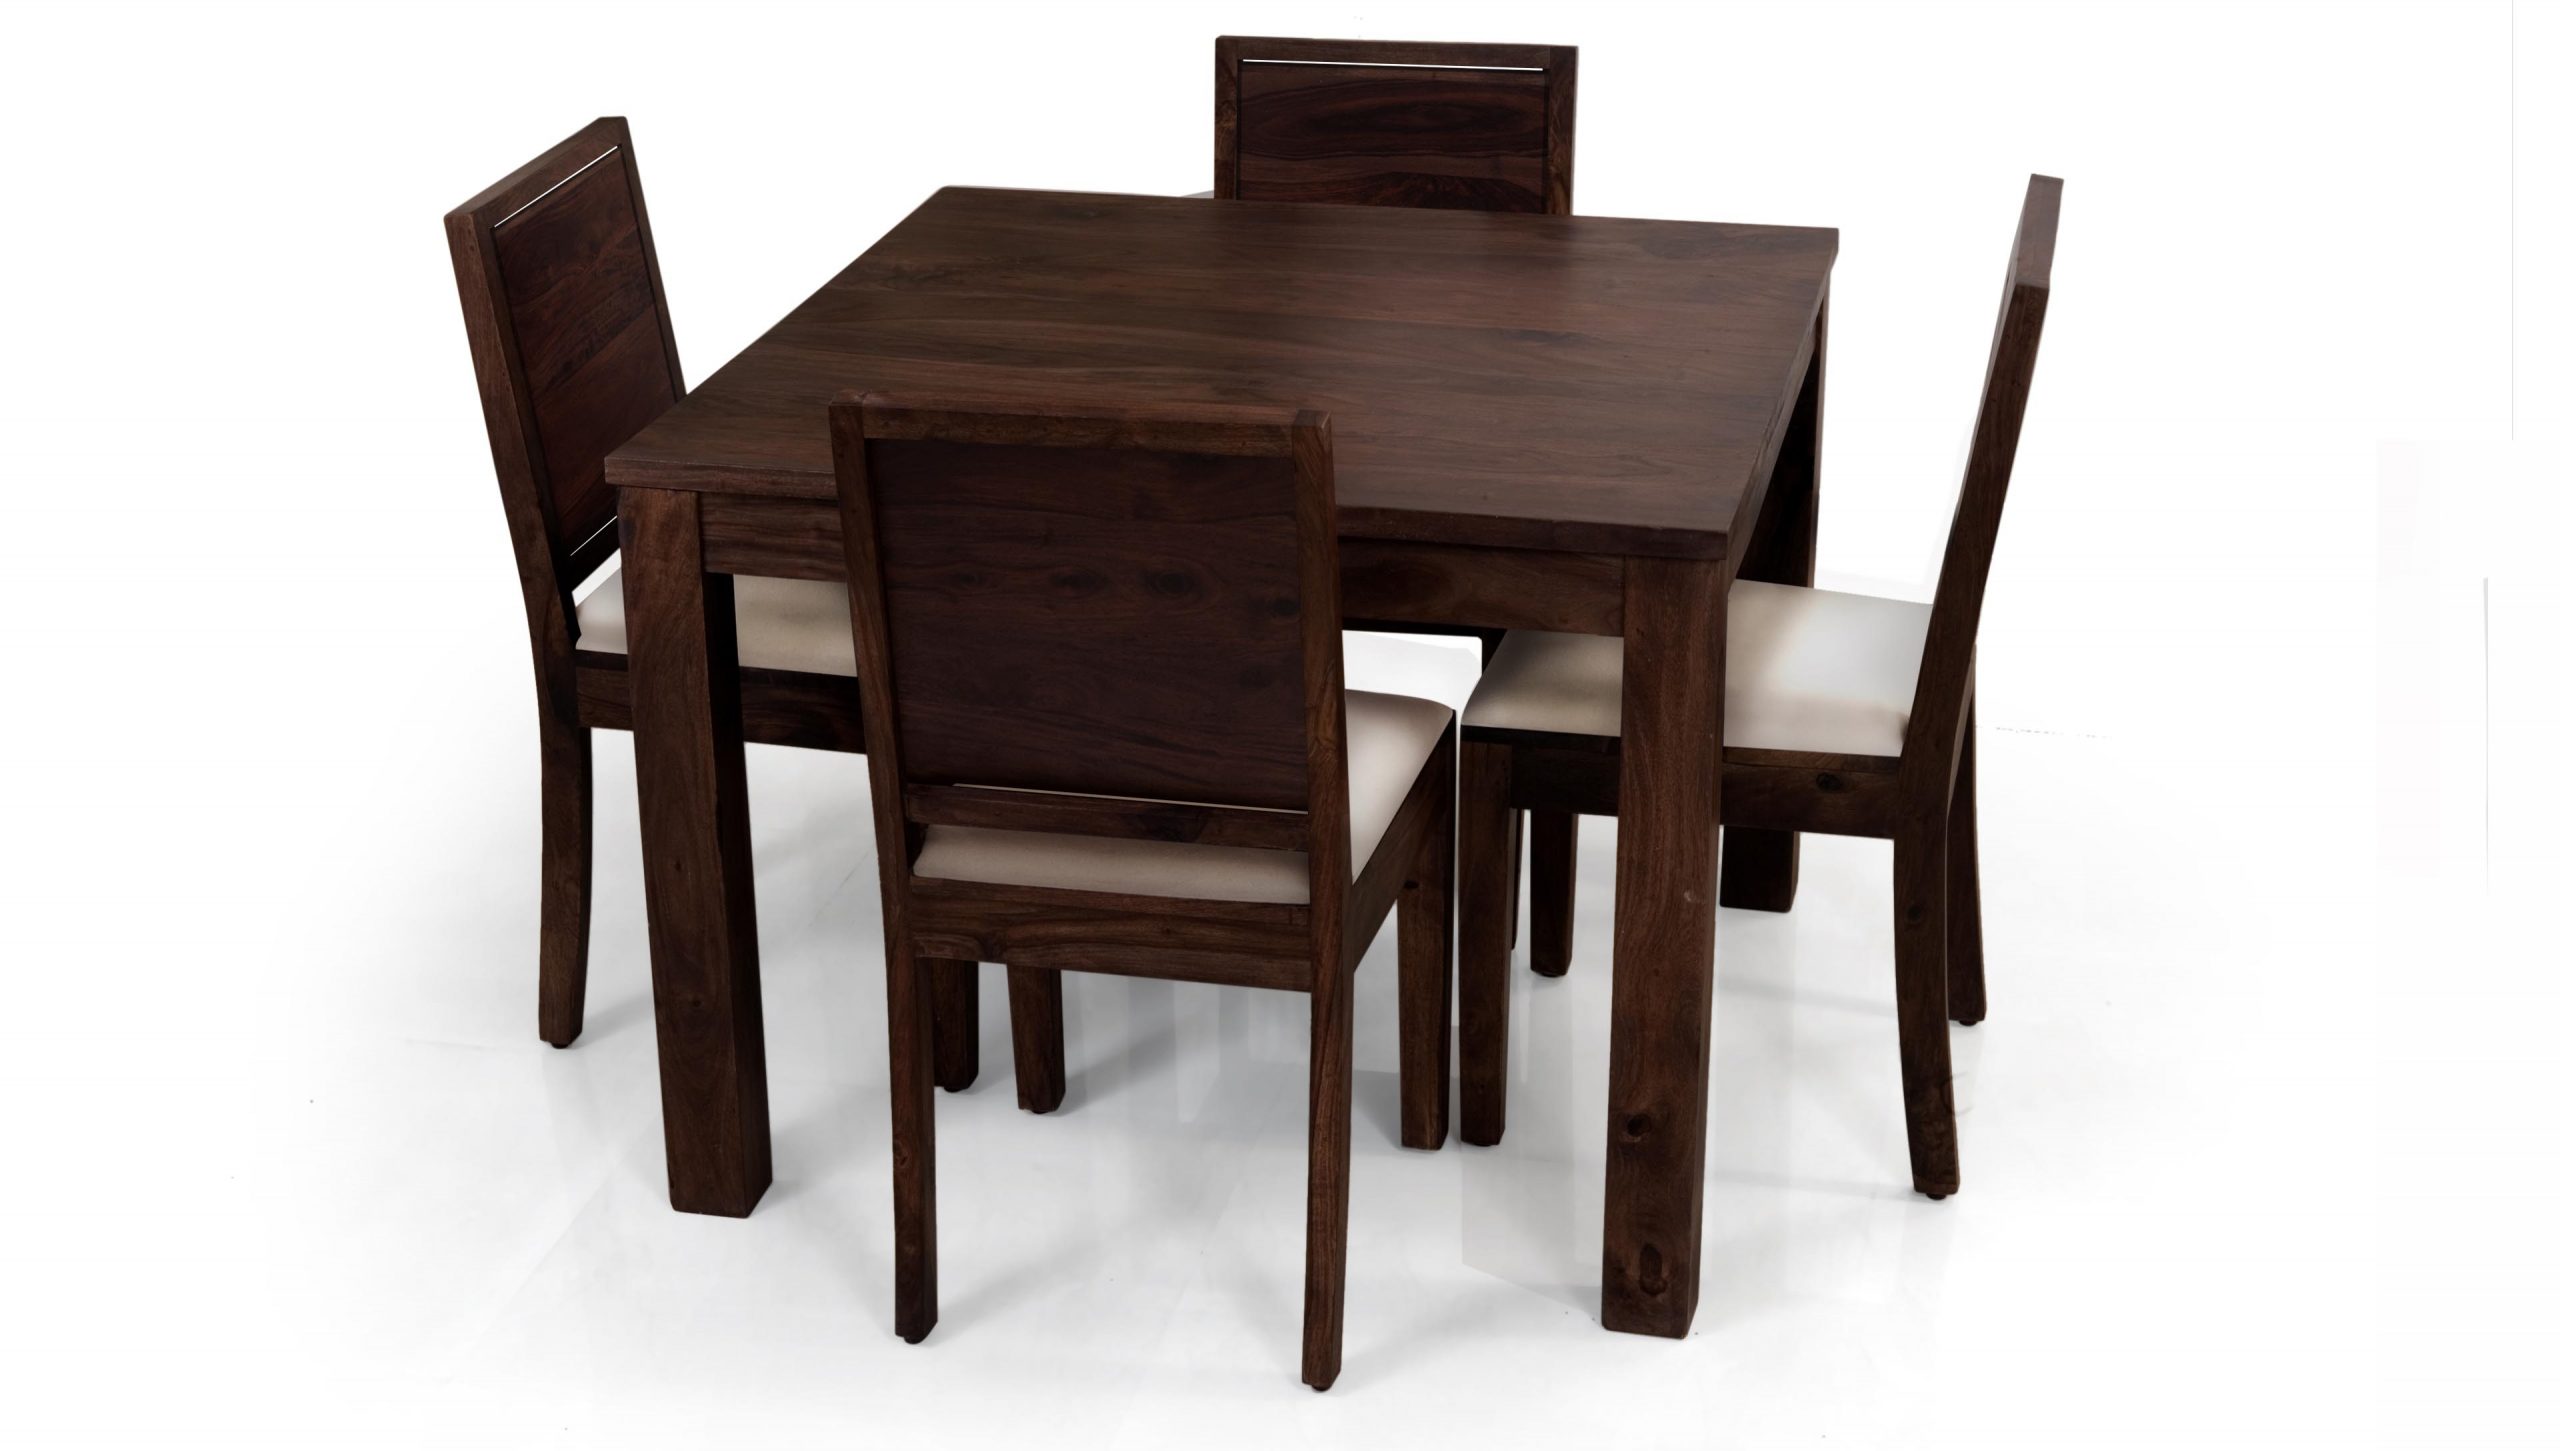 Chair Awesome Small Dining Table With Chairs for size 3840 X 2176